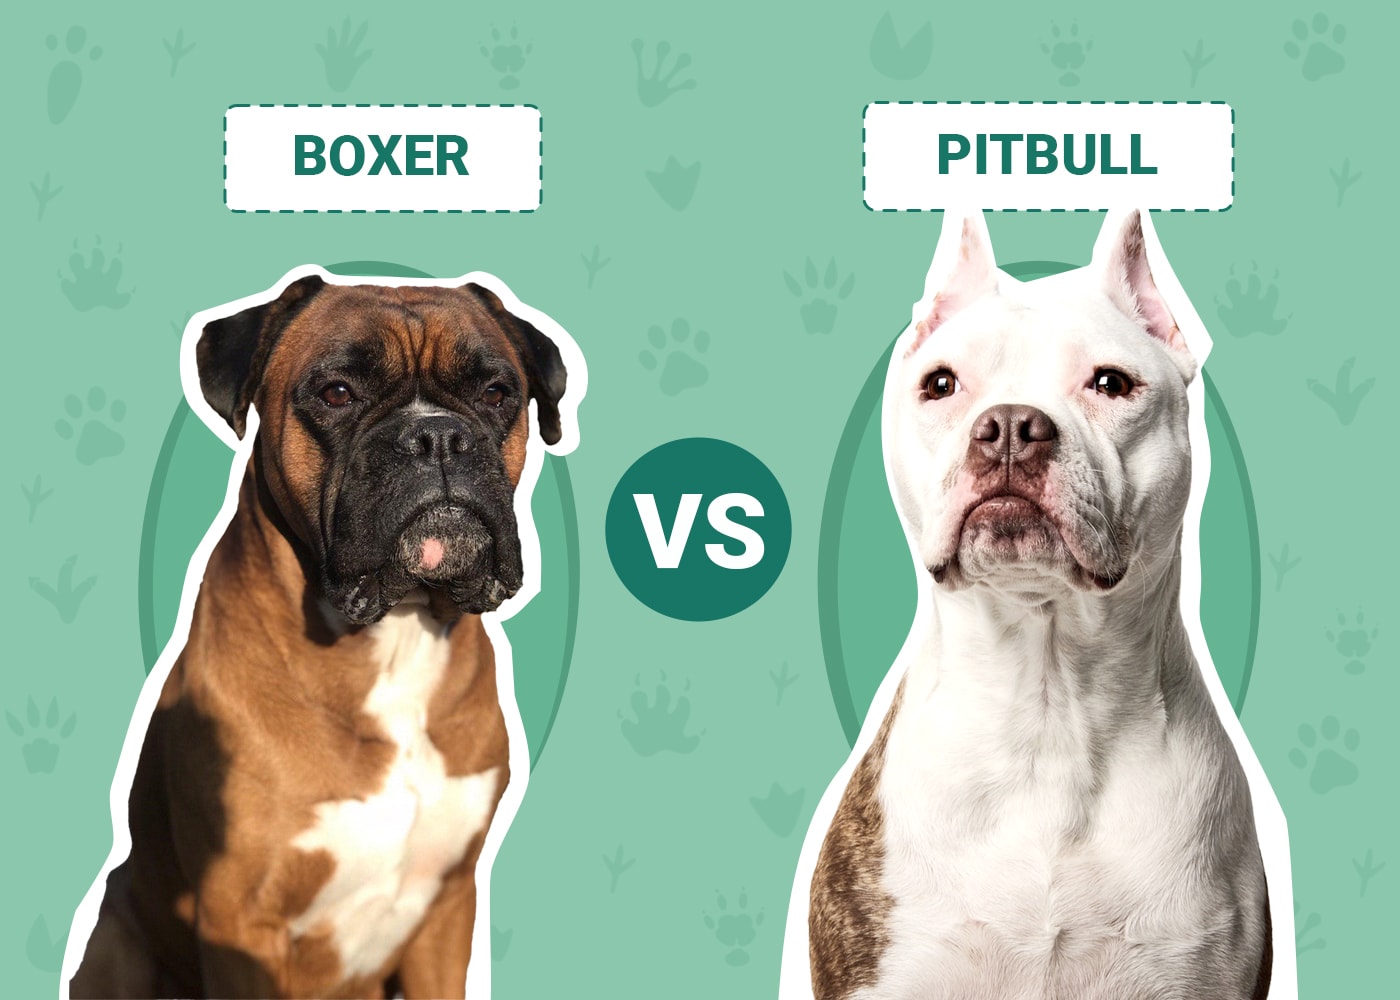 Boxer vs Pitbull: The Differences (With Pictures) | Pet Keen